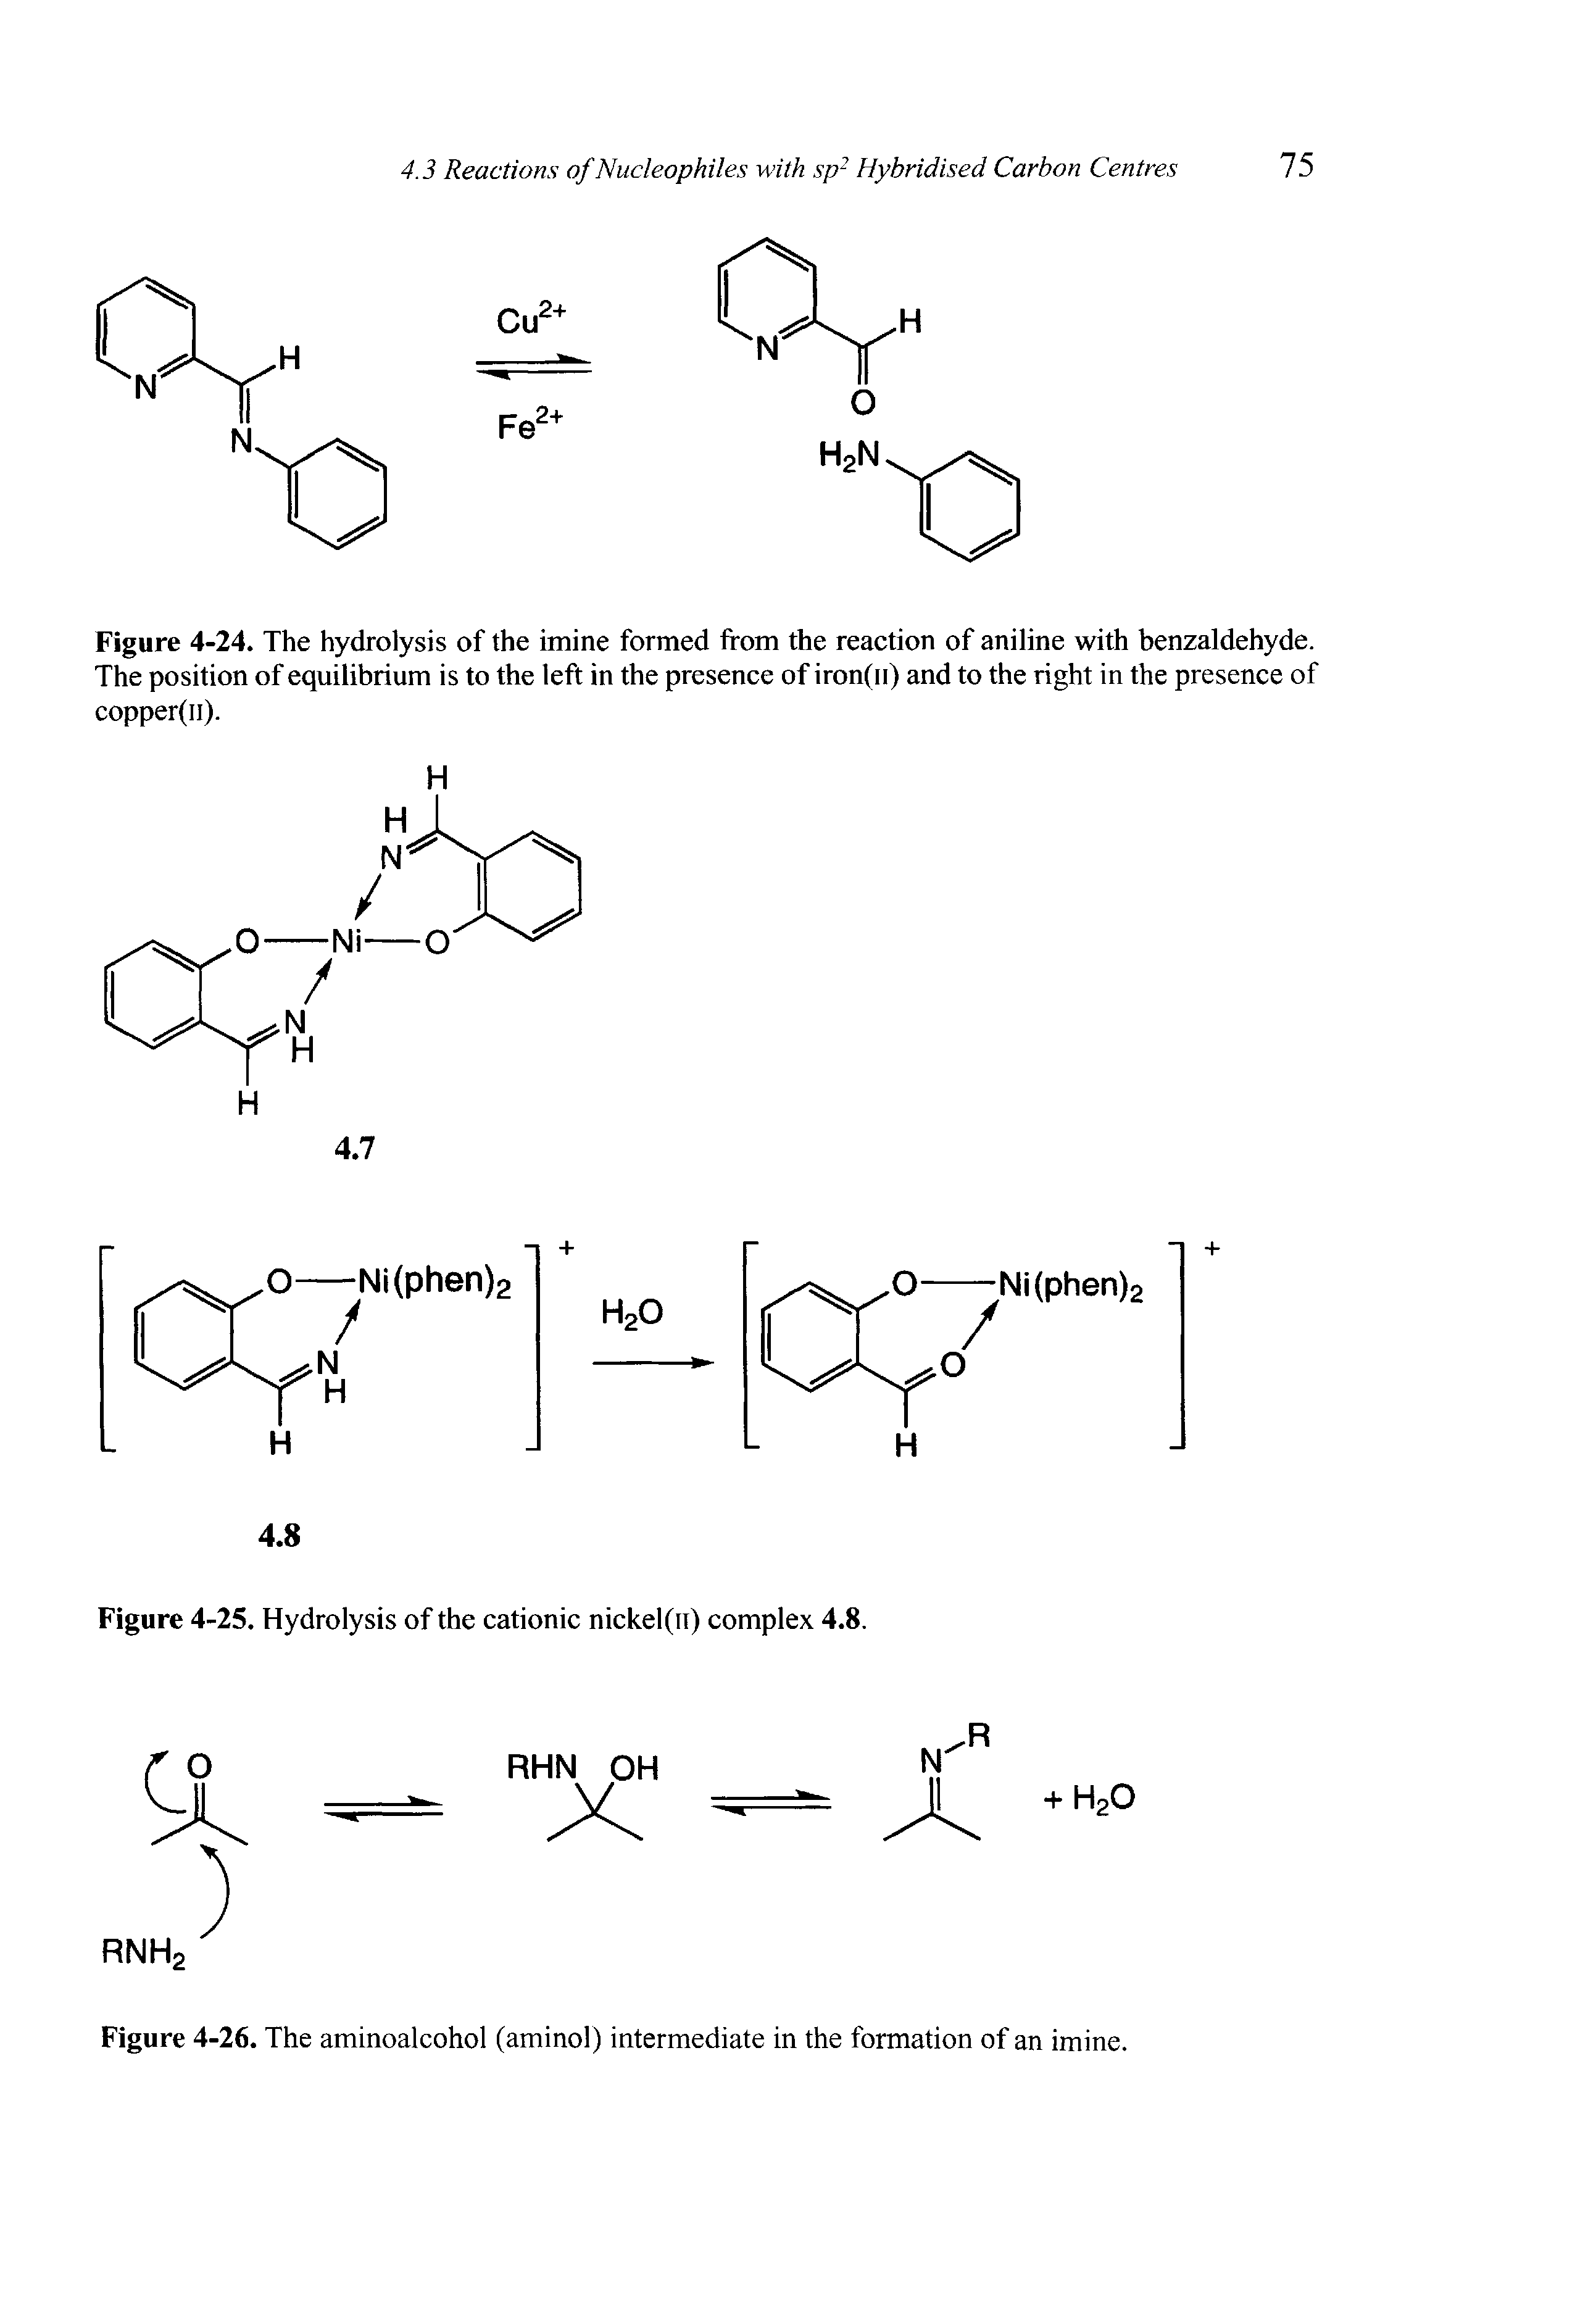 Figure 4-26. The aminoalcohol (aminol) intermediate in the formation of an imine.